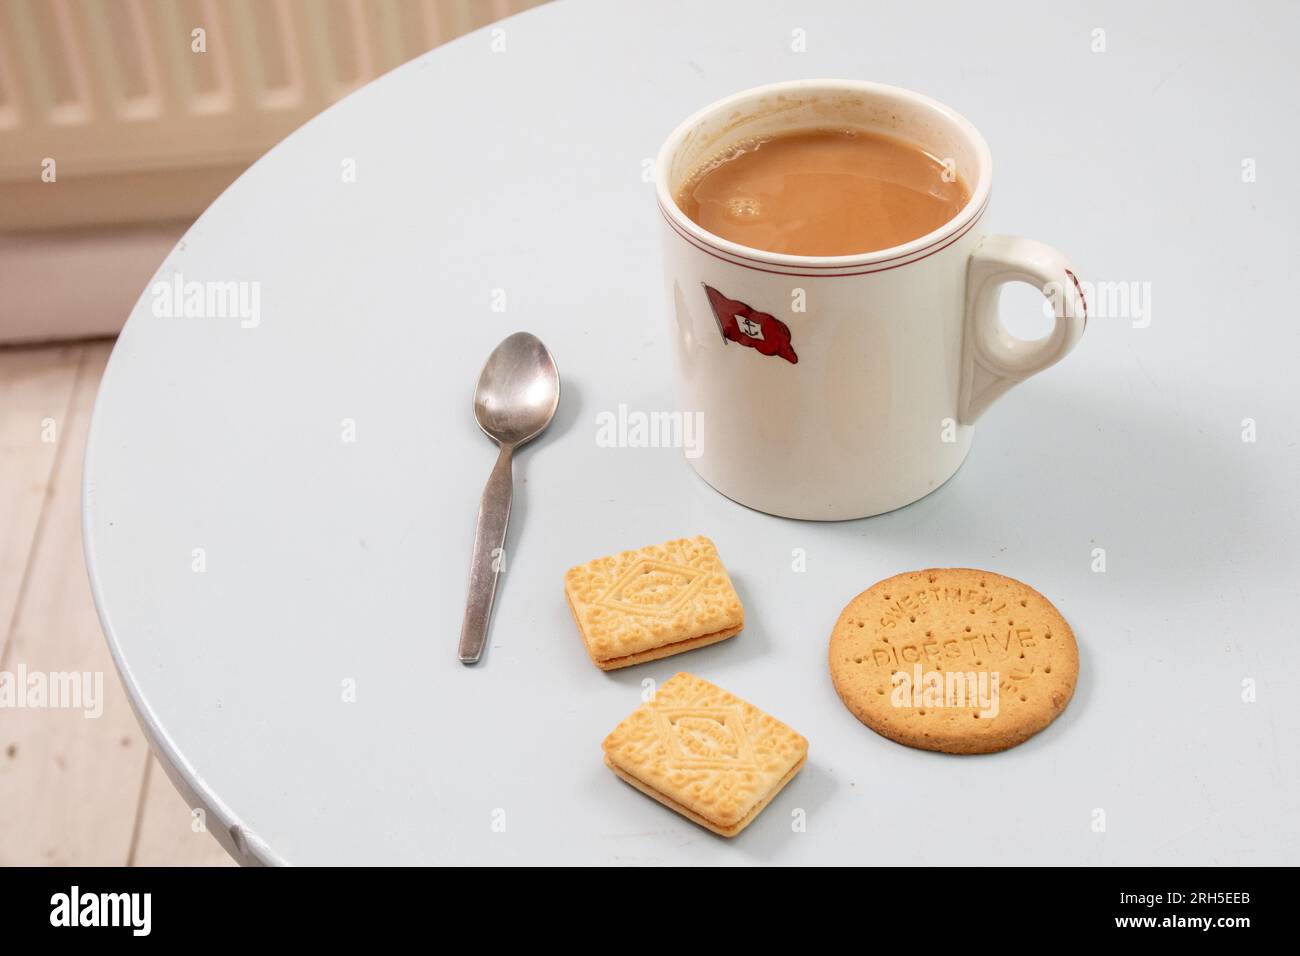 A mug of strong tea and three biscuits waiting for a very British moment of refreshment Stock Photo